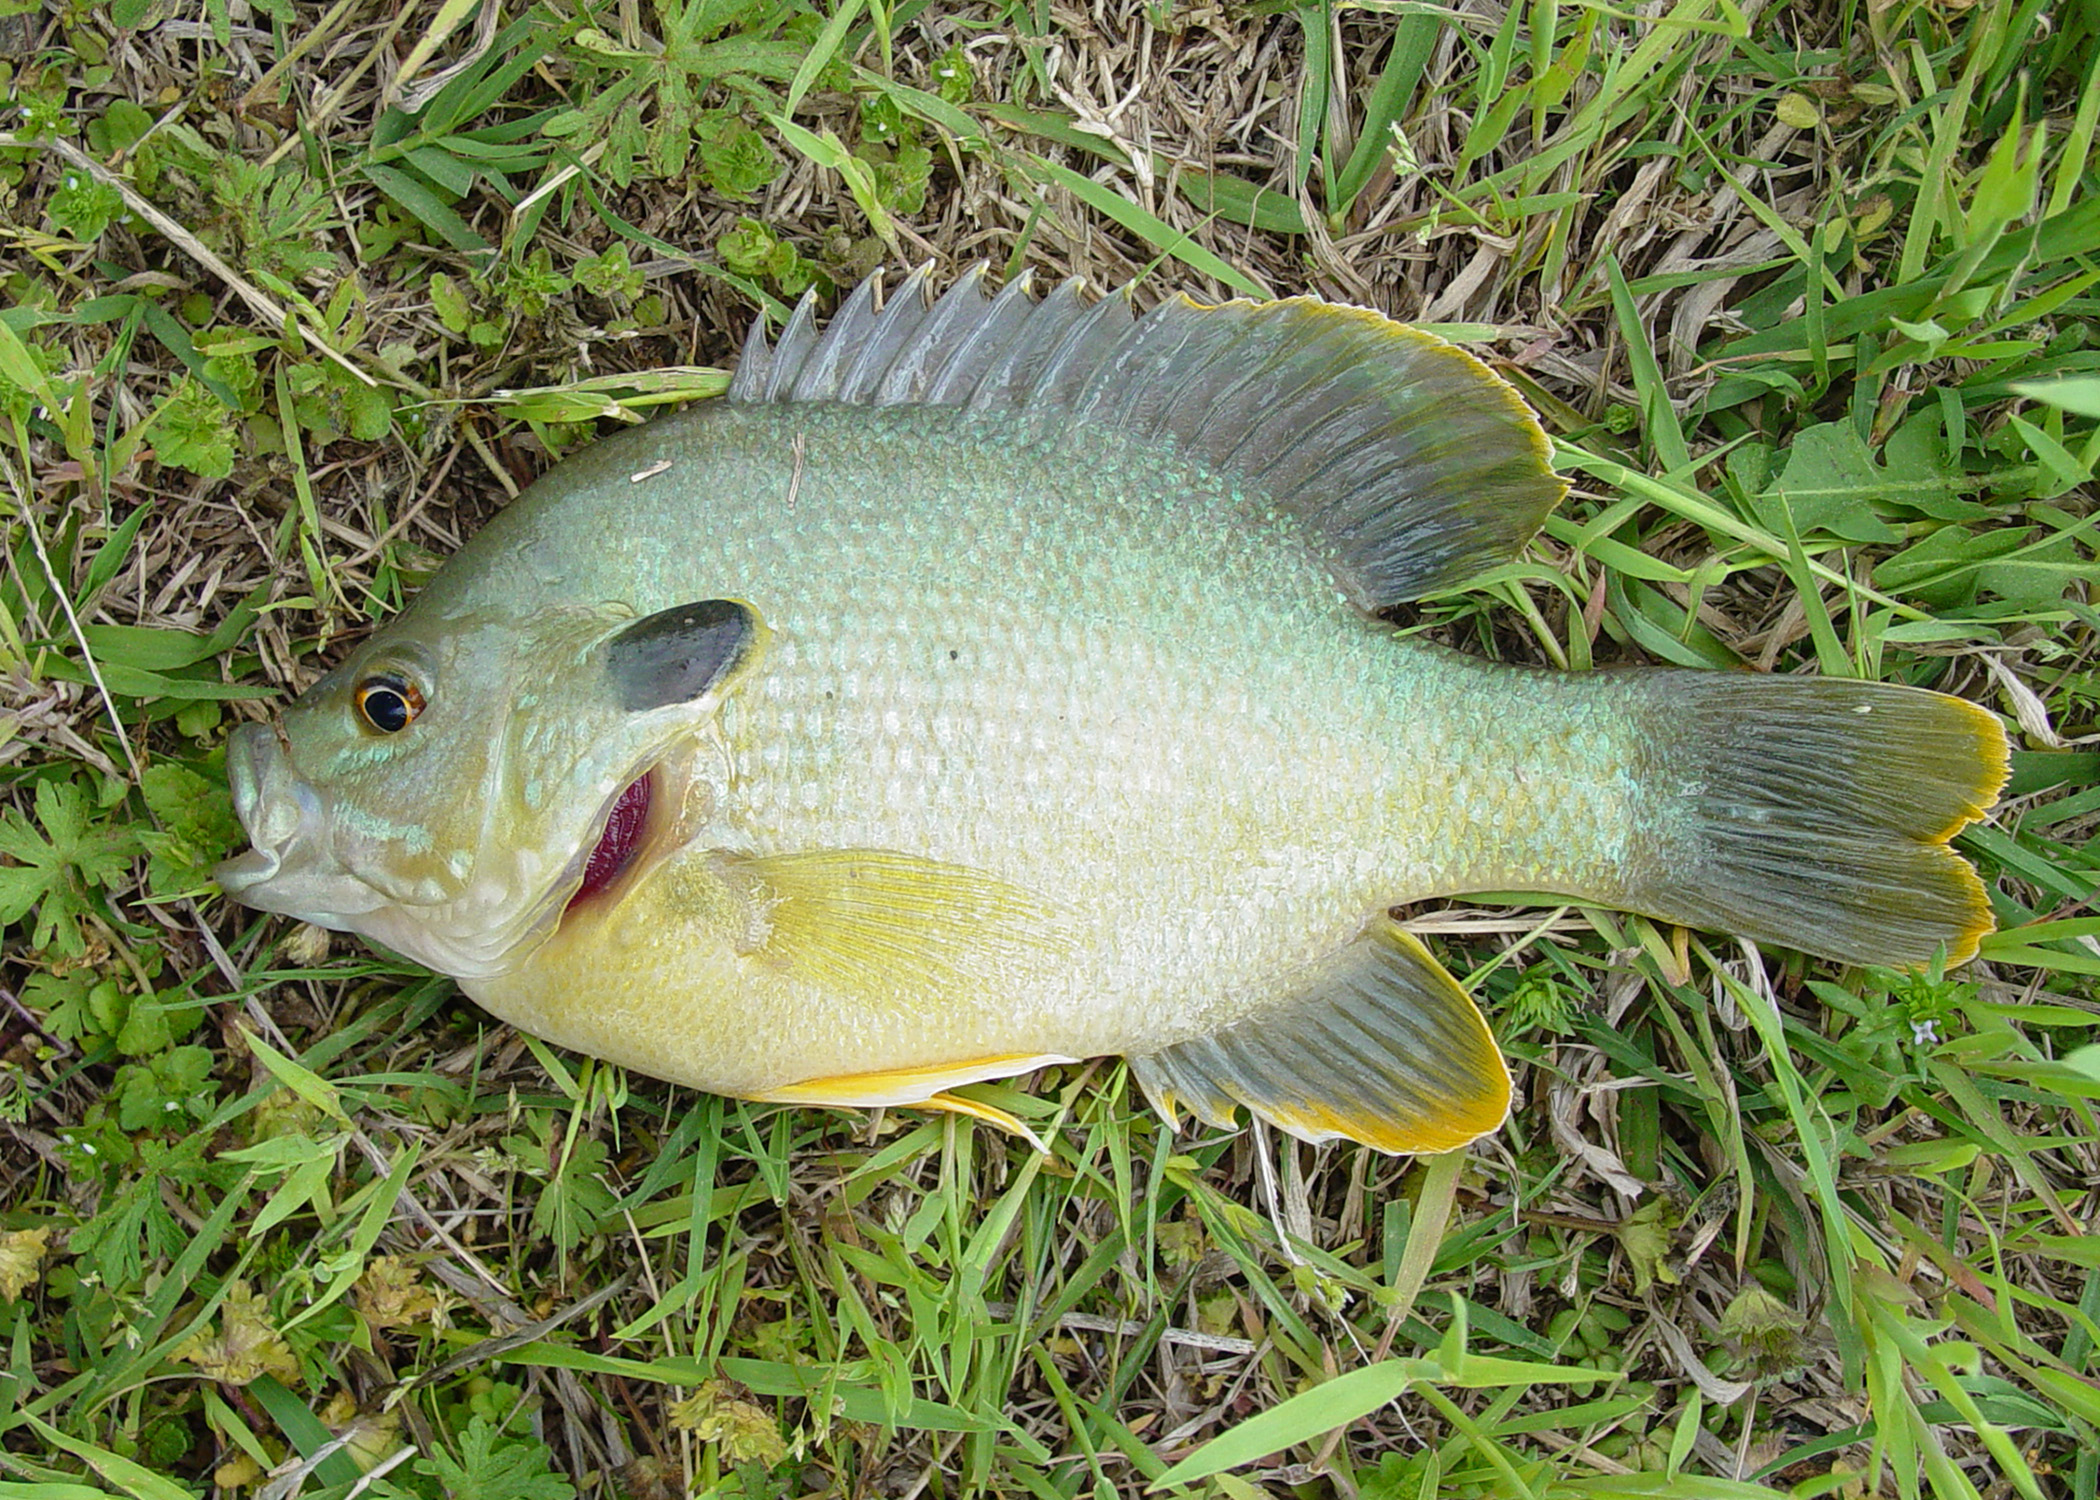 Small ponds support hybrid sunfish well